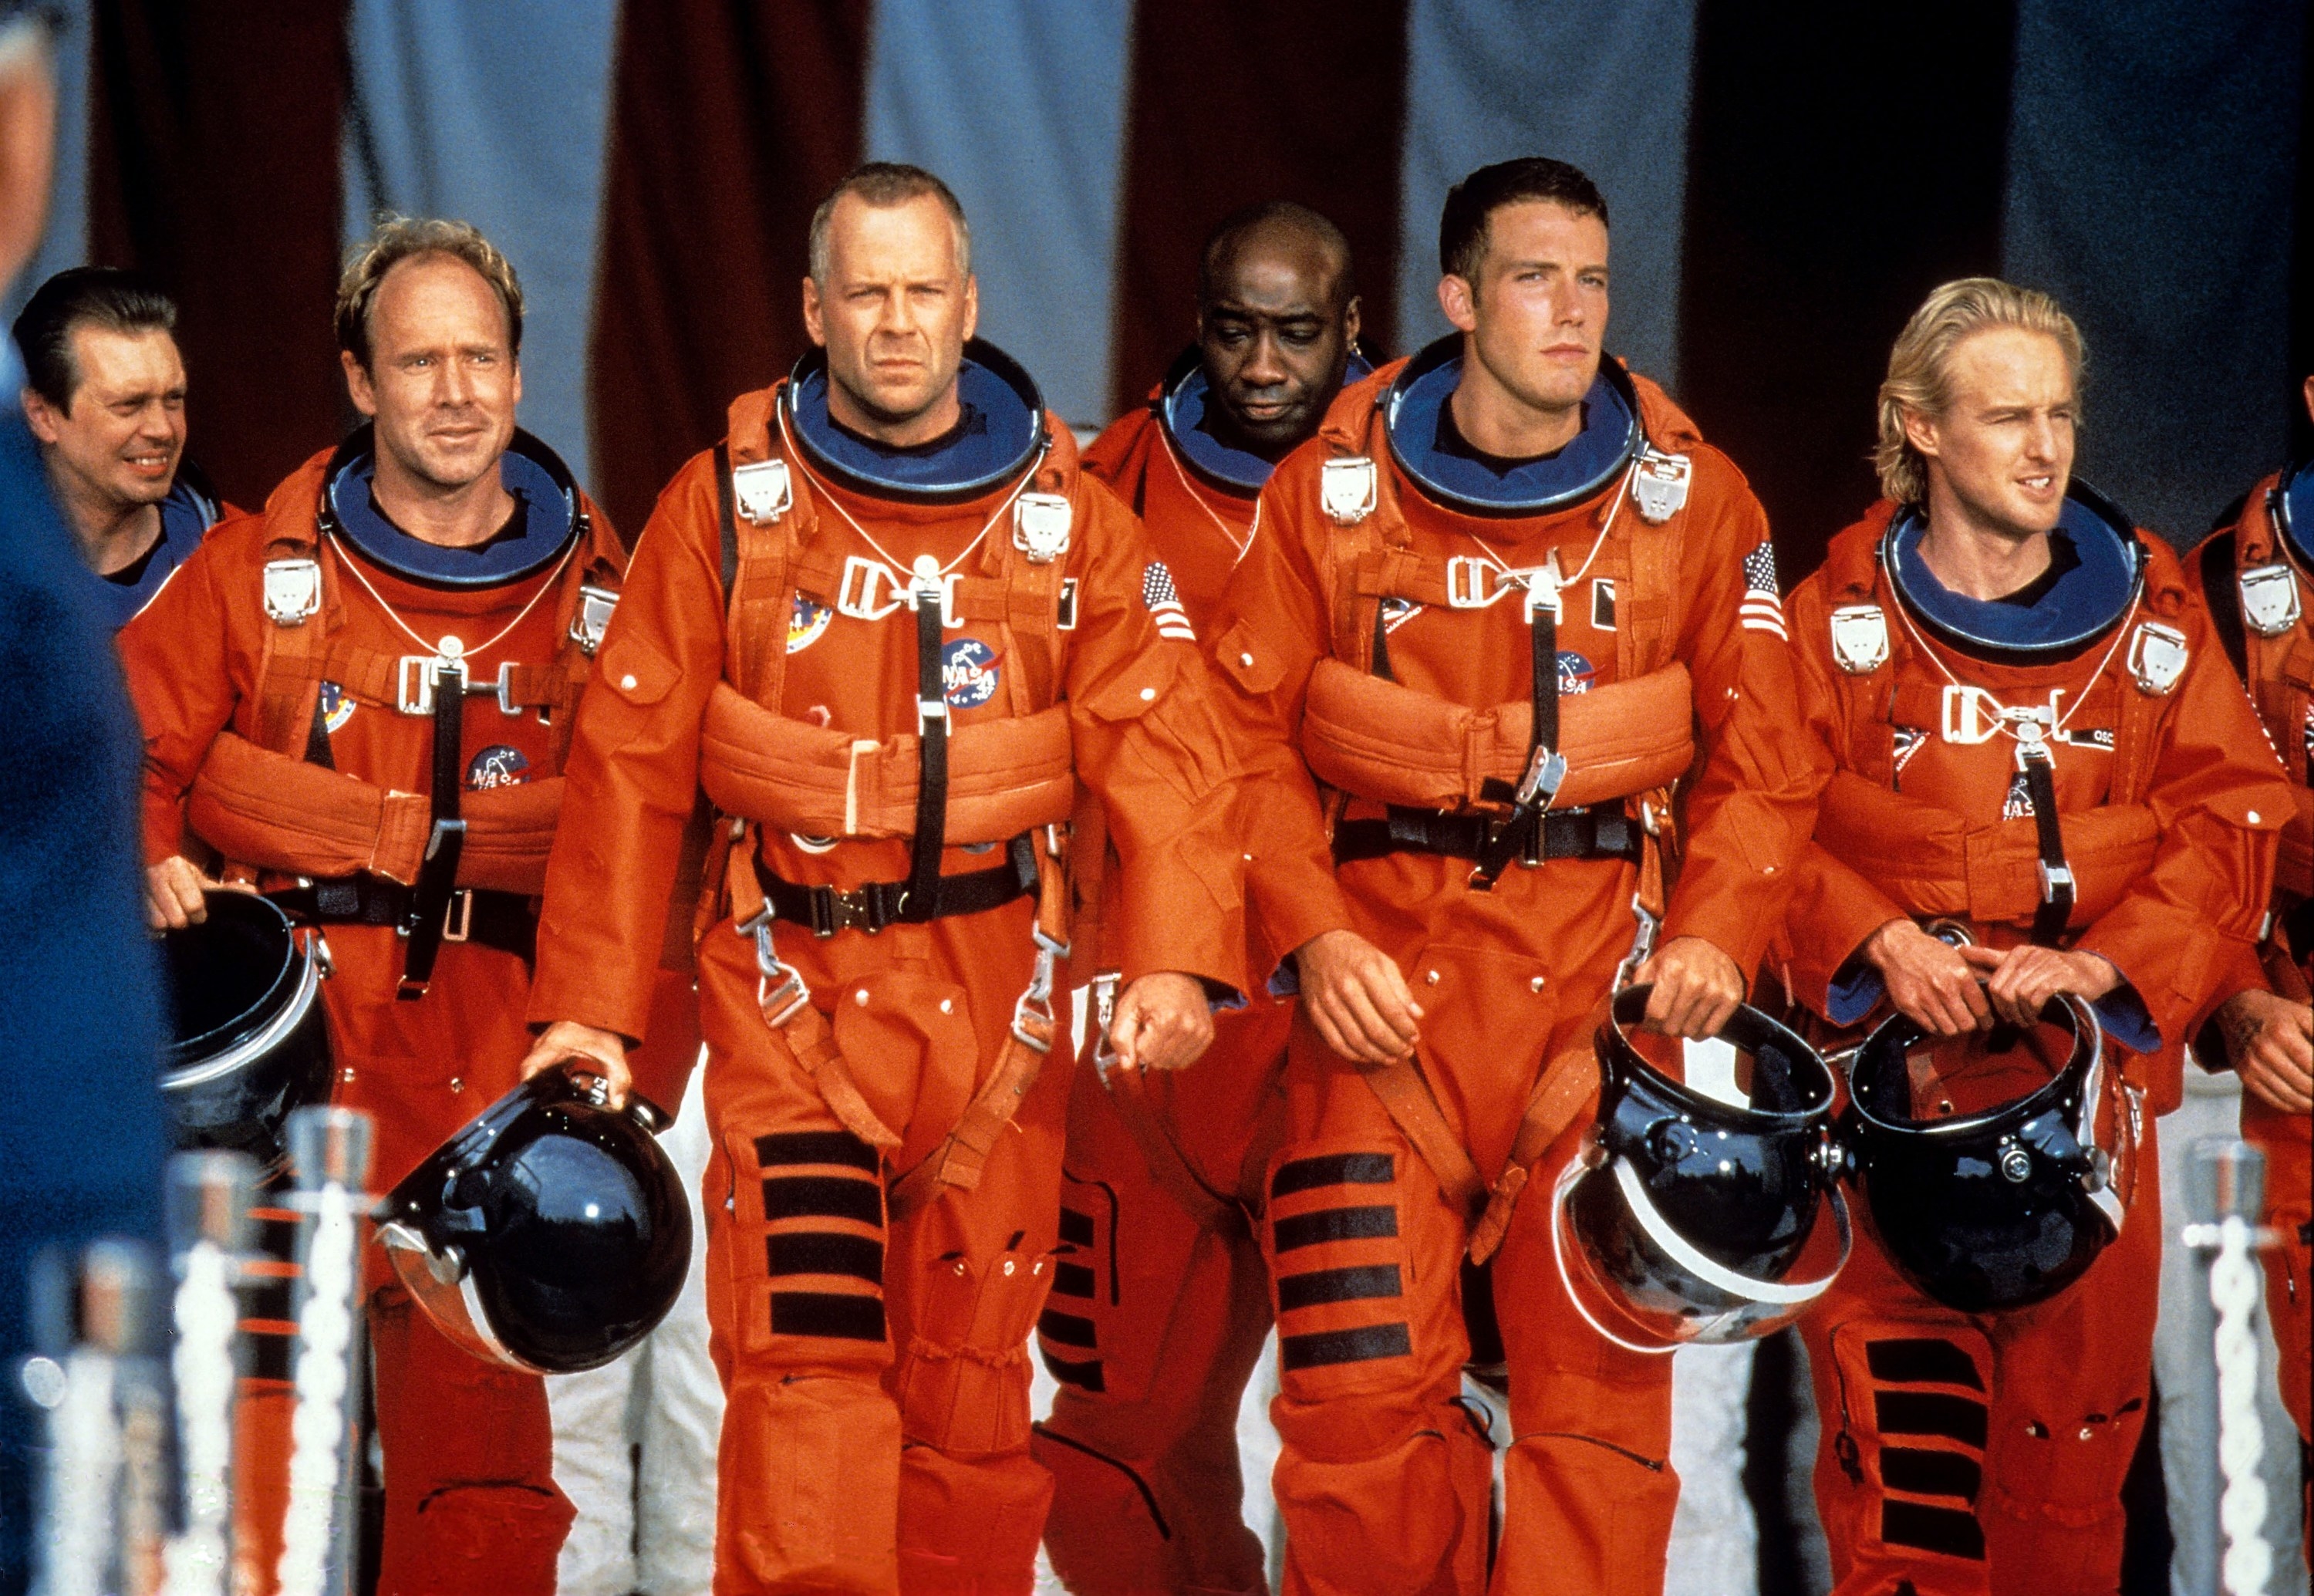 The drilling/astronaut crew walking to the space shuttle in Armageddon